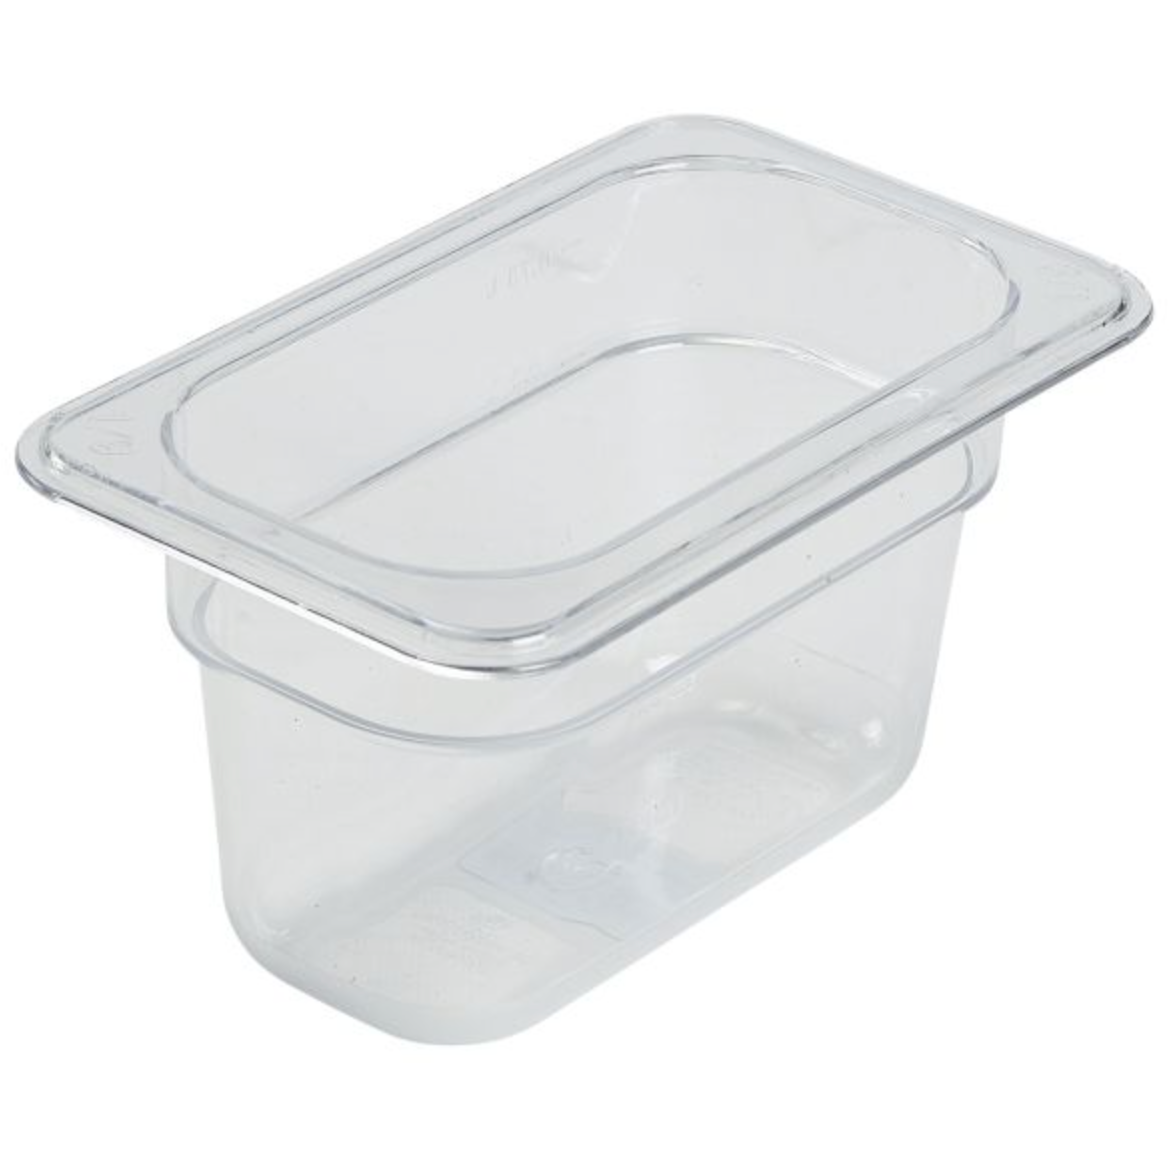 GenWare 1/9 -Polycarbonate GN Pan 100mm Clear